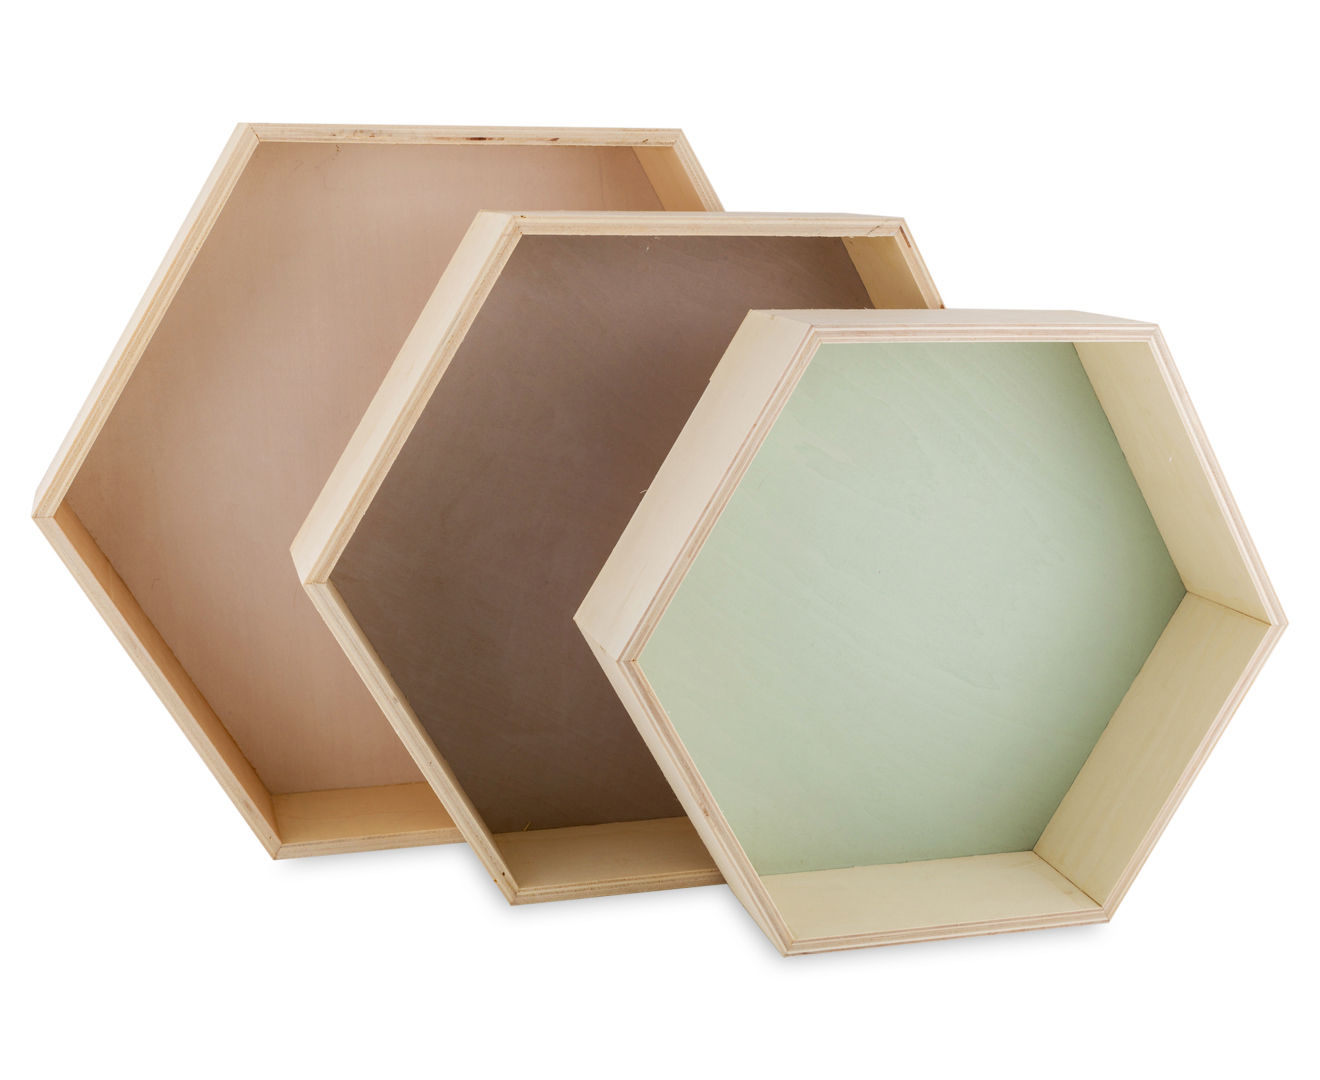 Set of 3 Nested Hexagonal Scandi Shadow Boxes - Assorted